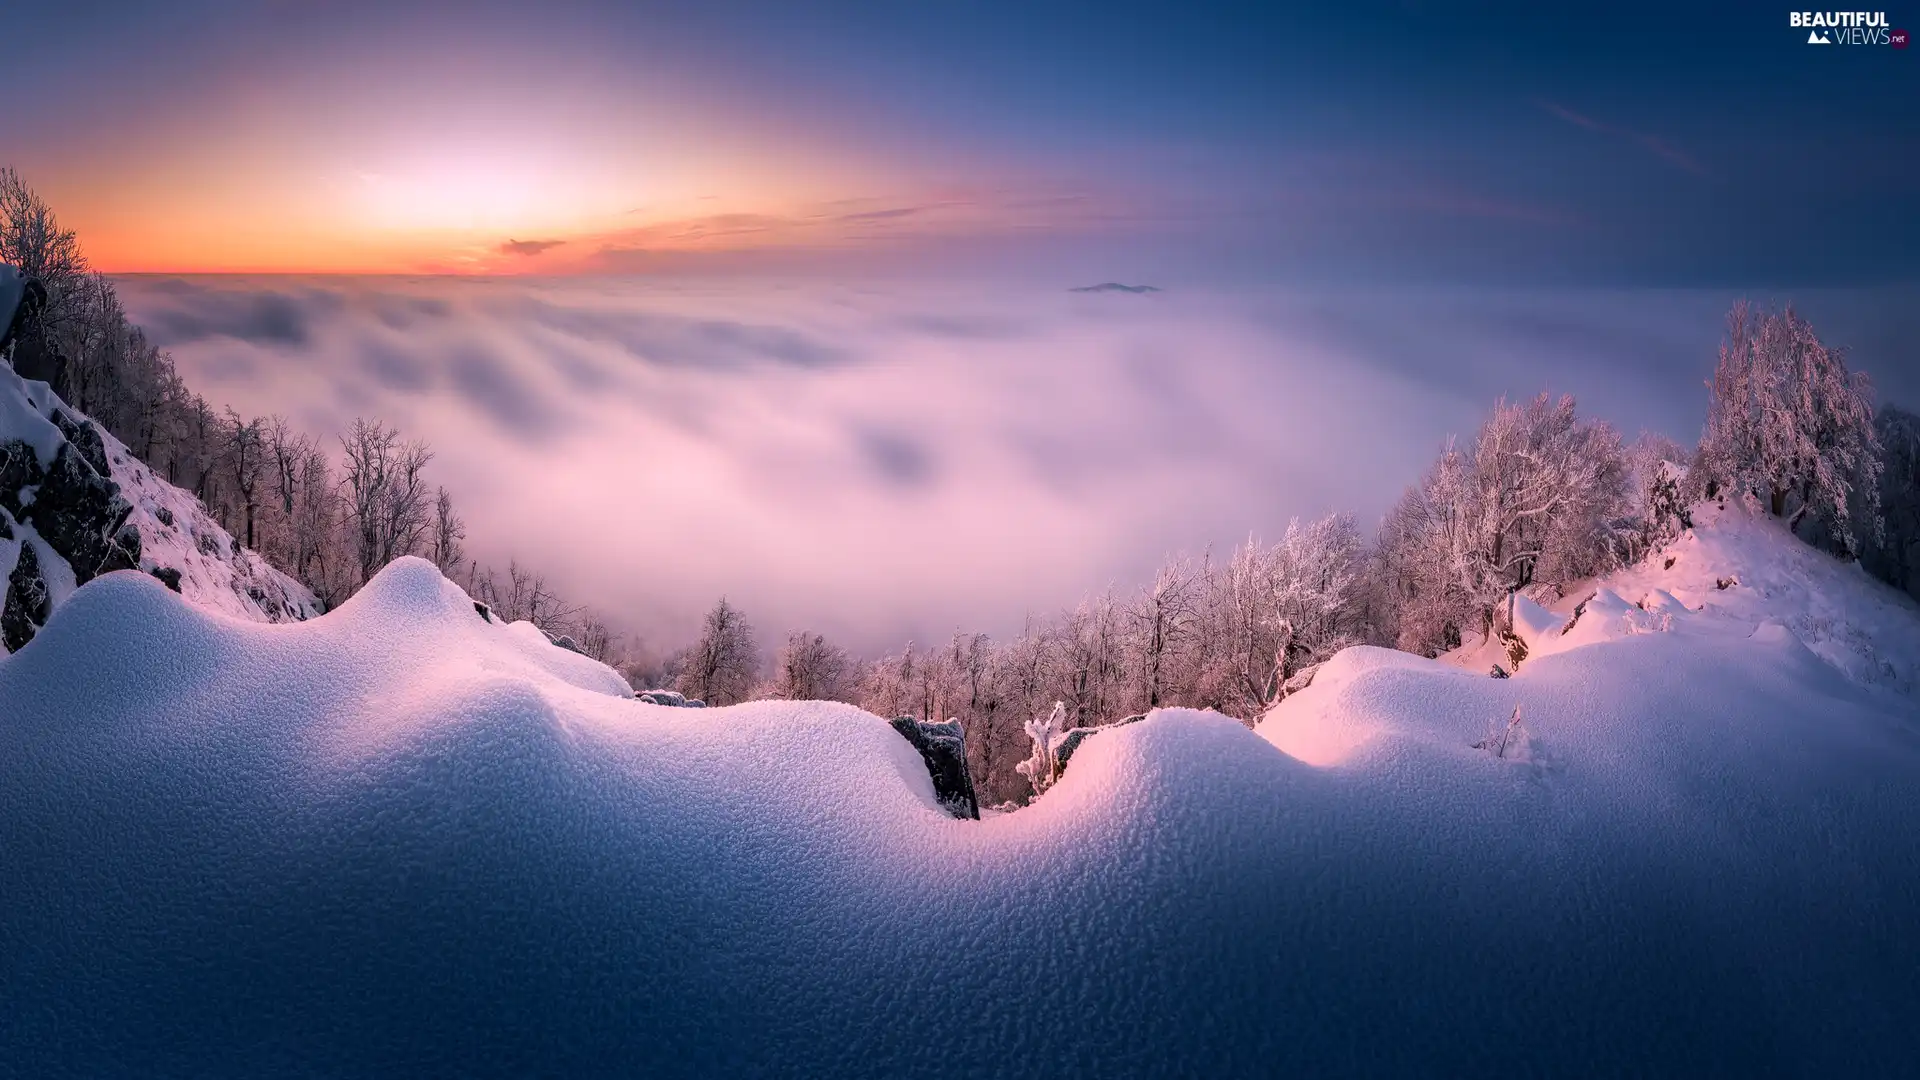 trees, Mountains, Fog, Snowy, winter, viewes, Sunrise